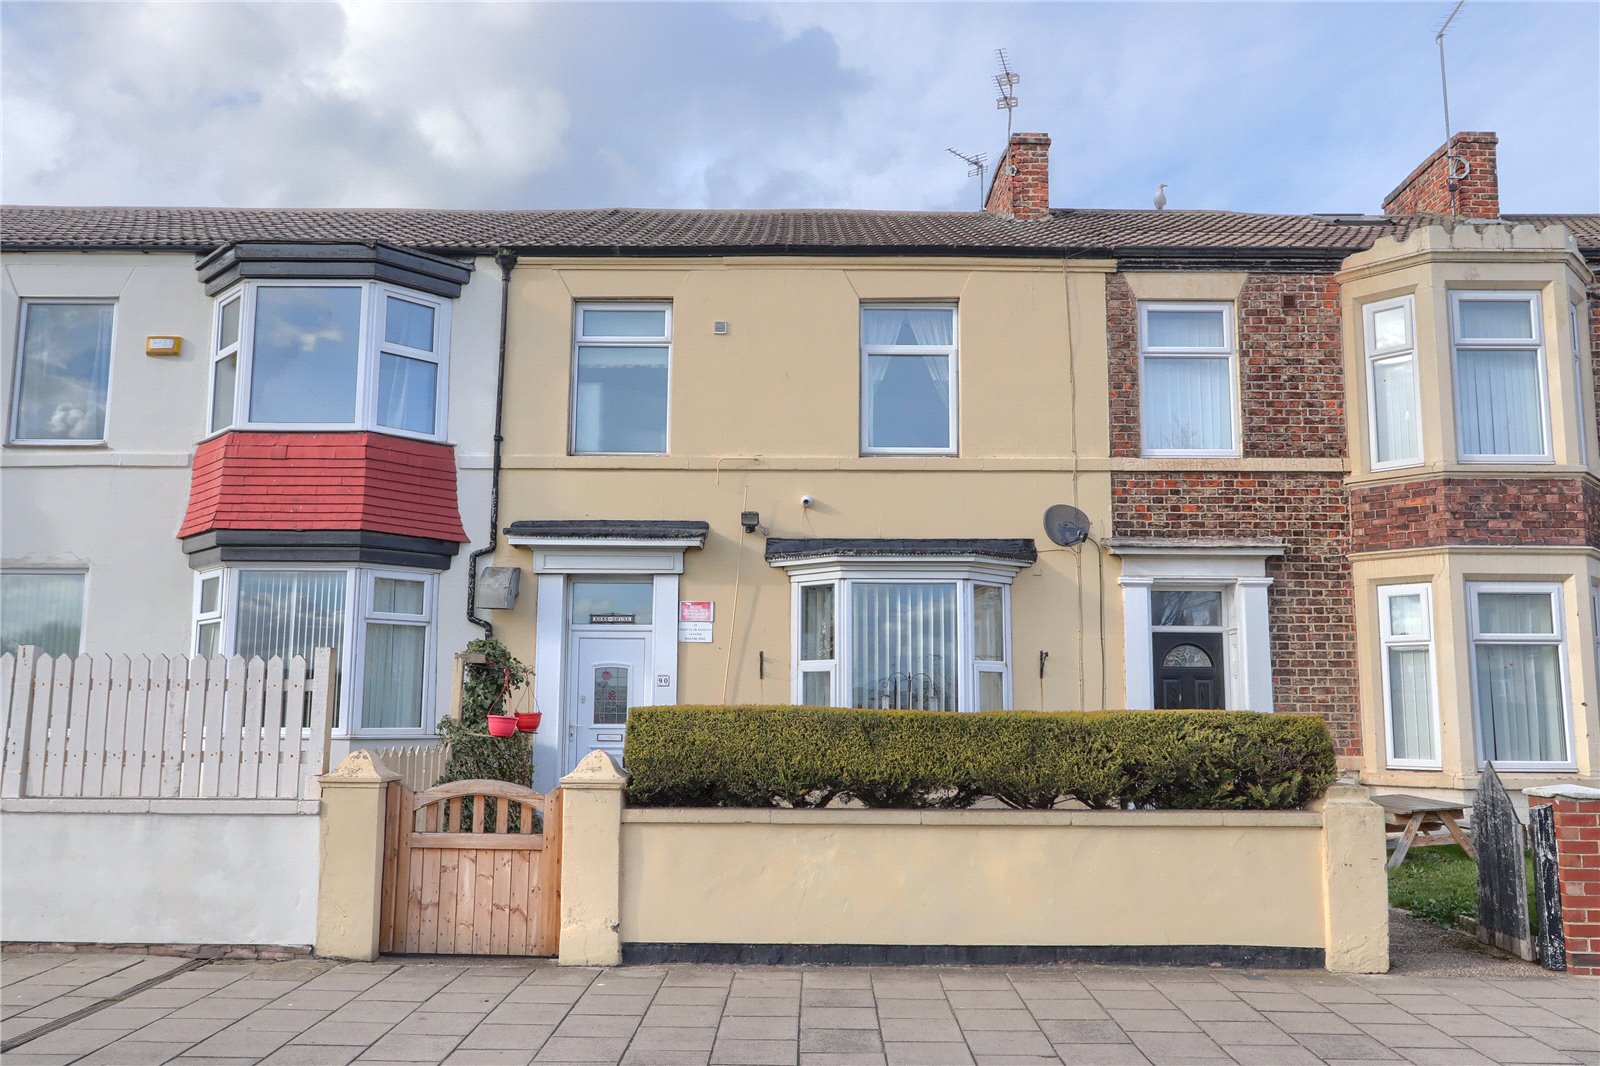 3 bed house for sale in Coatham Road, Redcar - Property Image 1